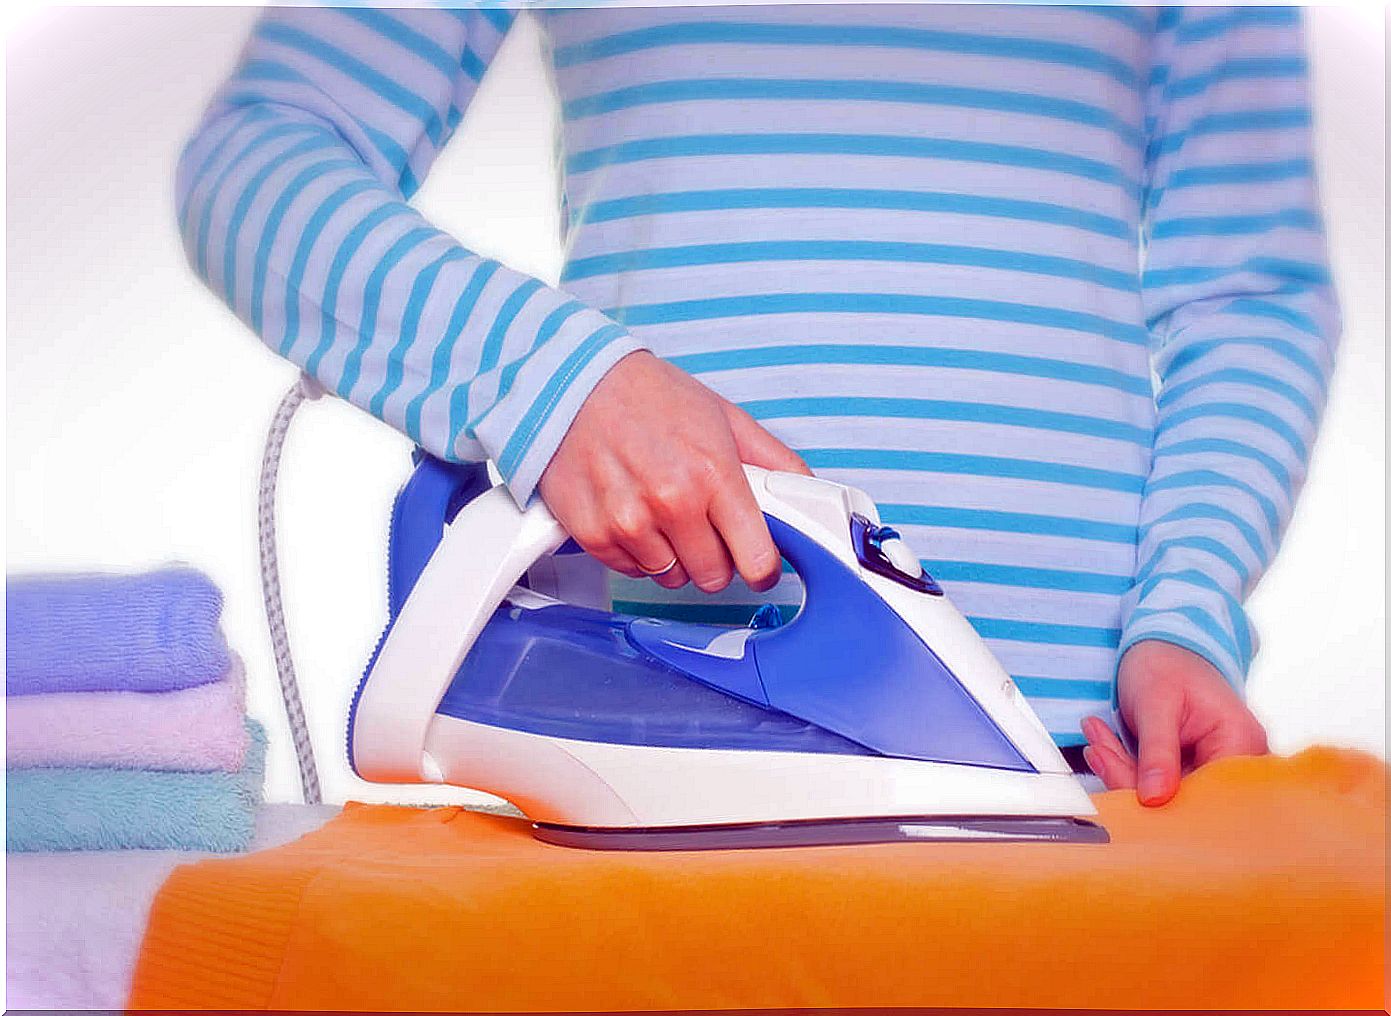 How can you clean an iron?